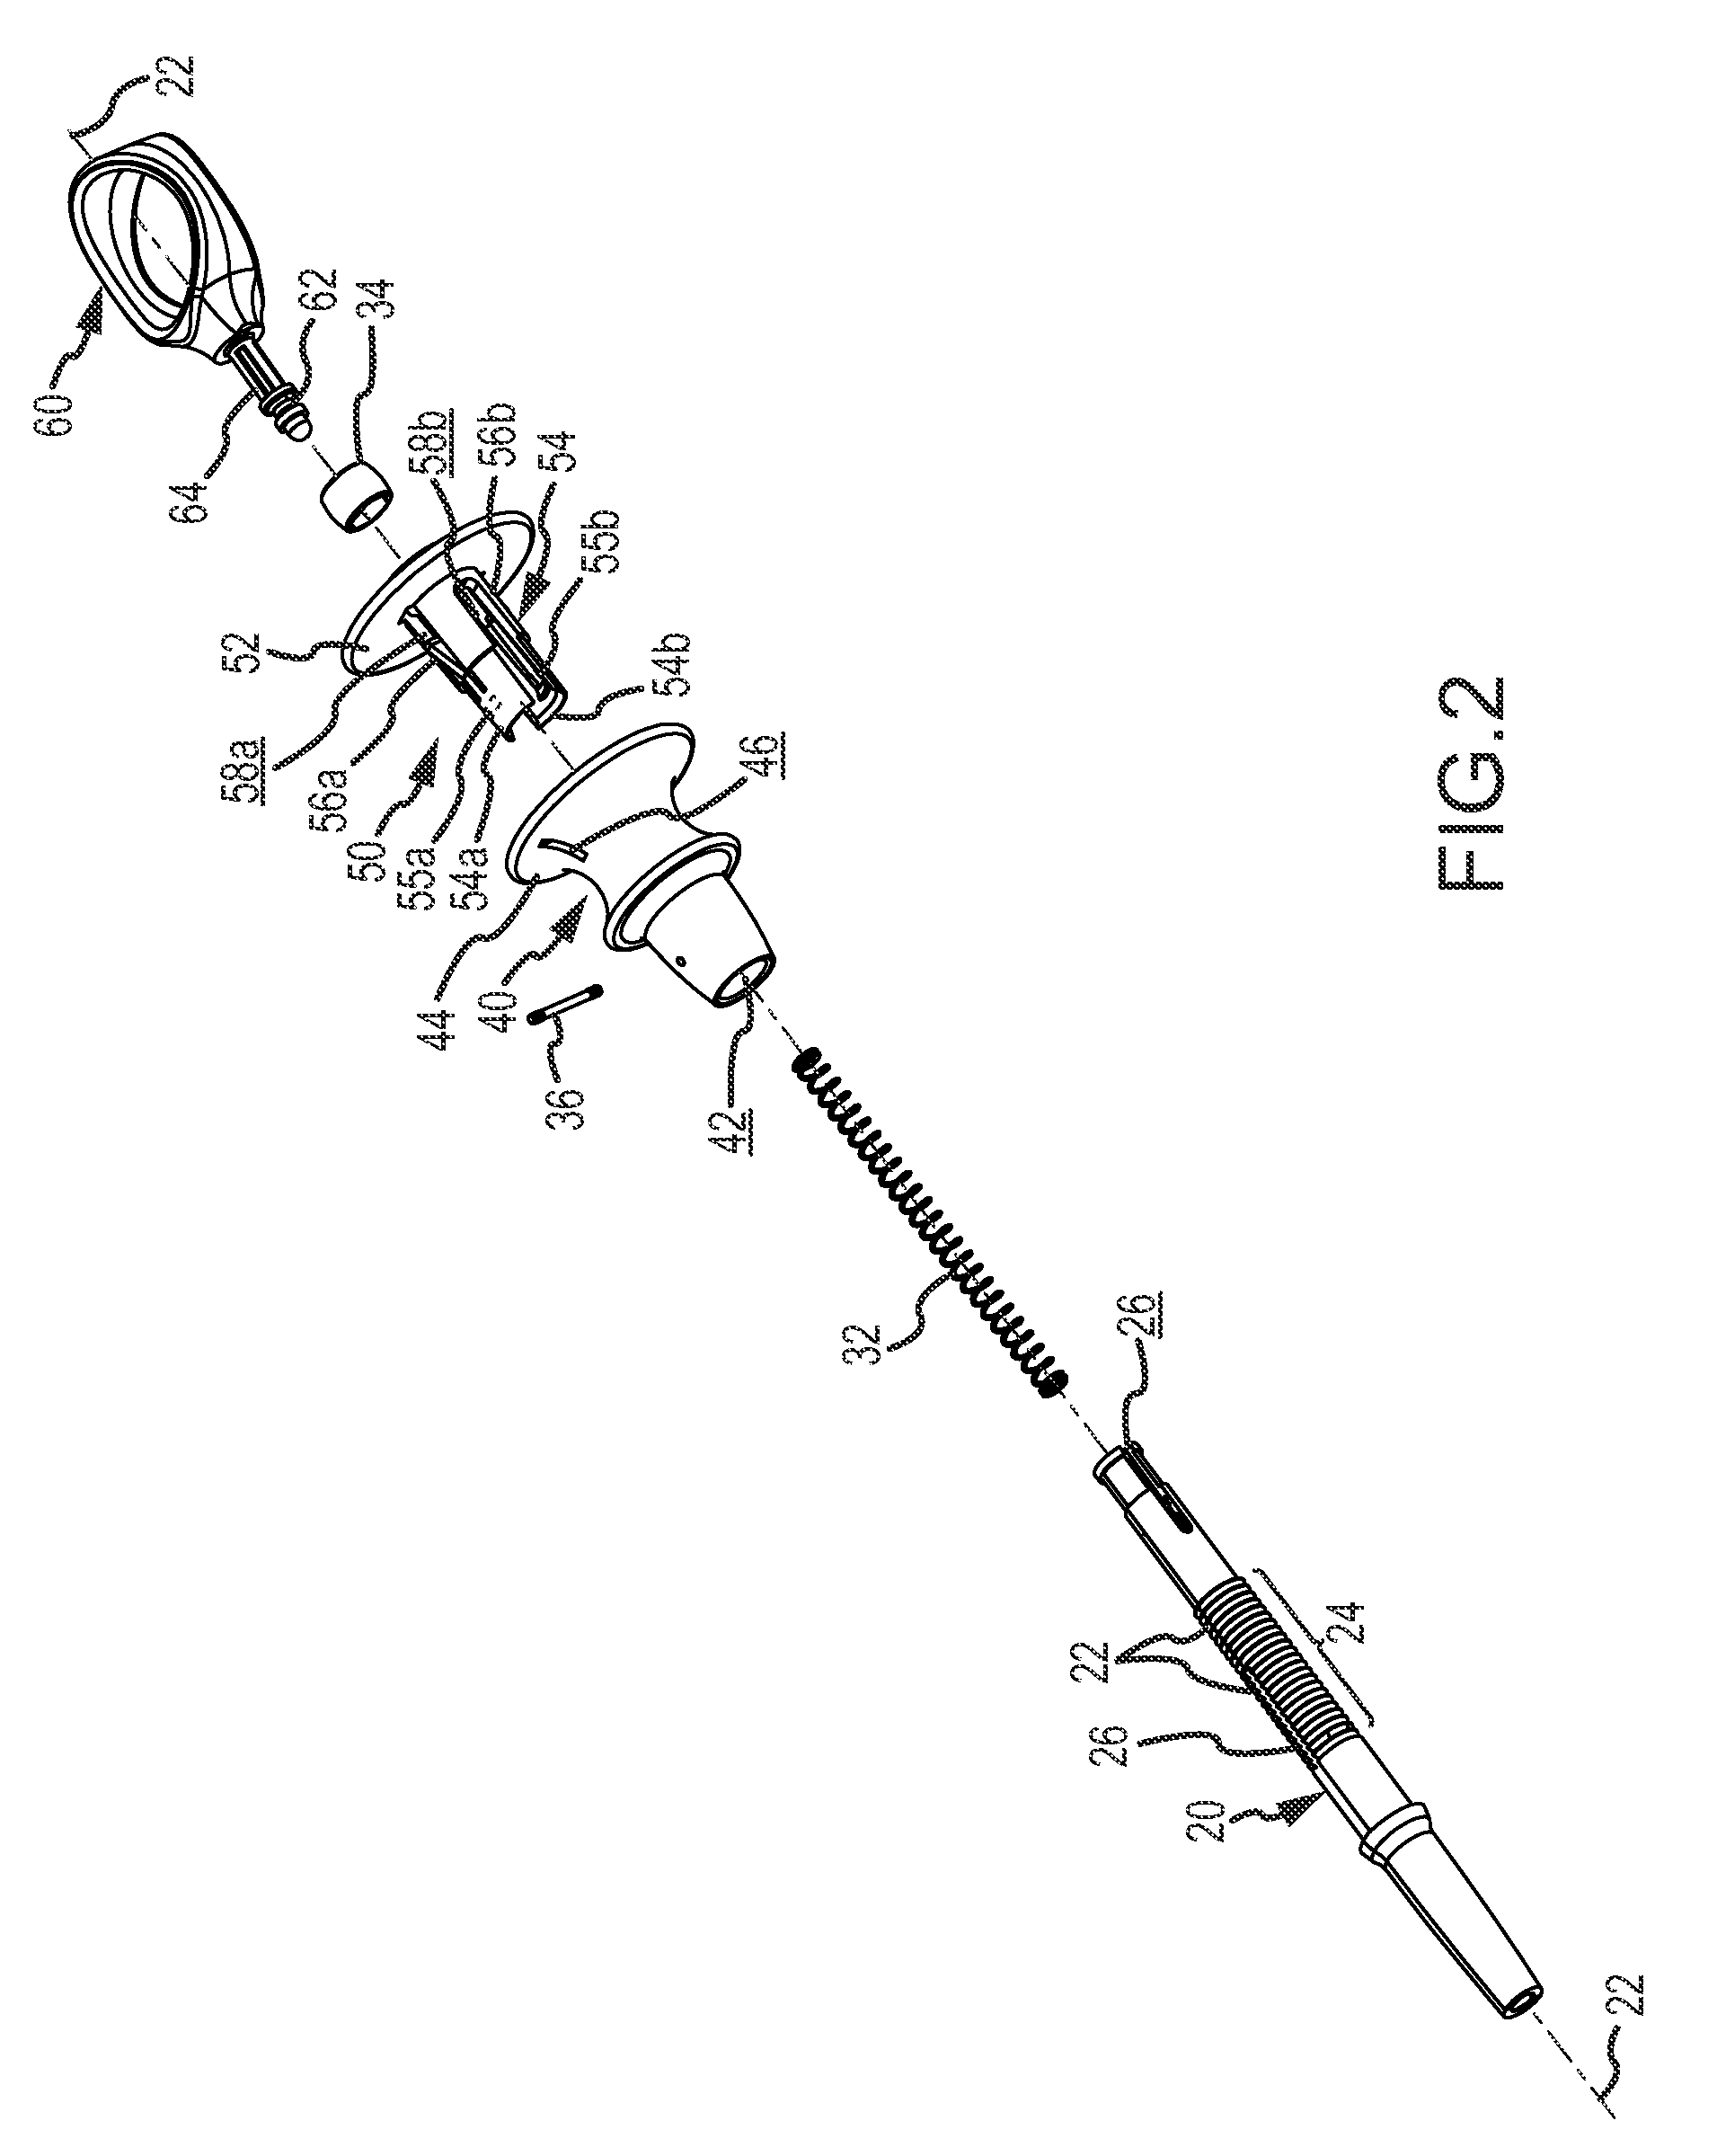 Endoscopic tissue grasping apparatus and method